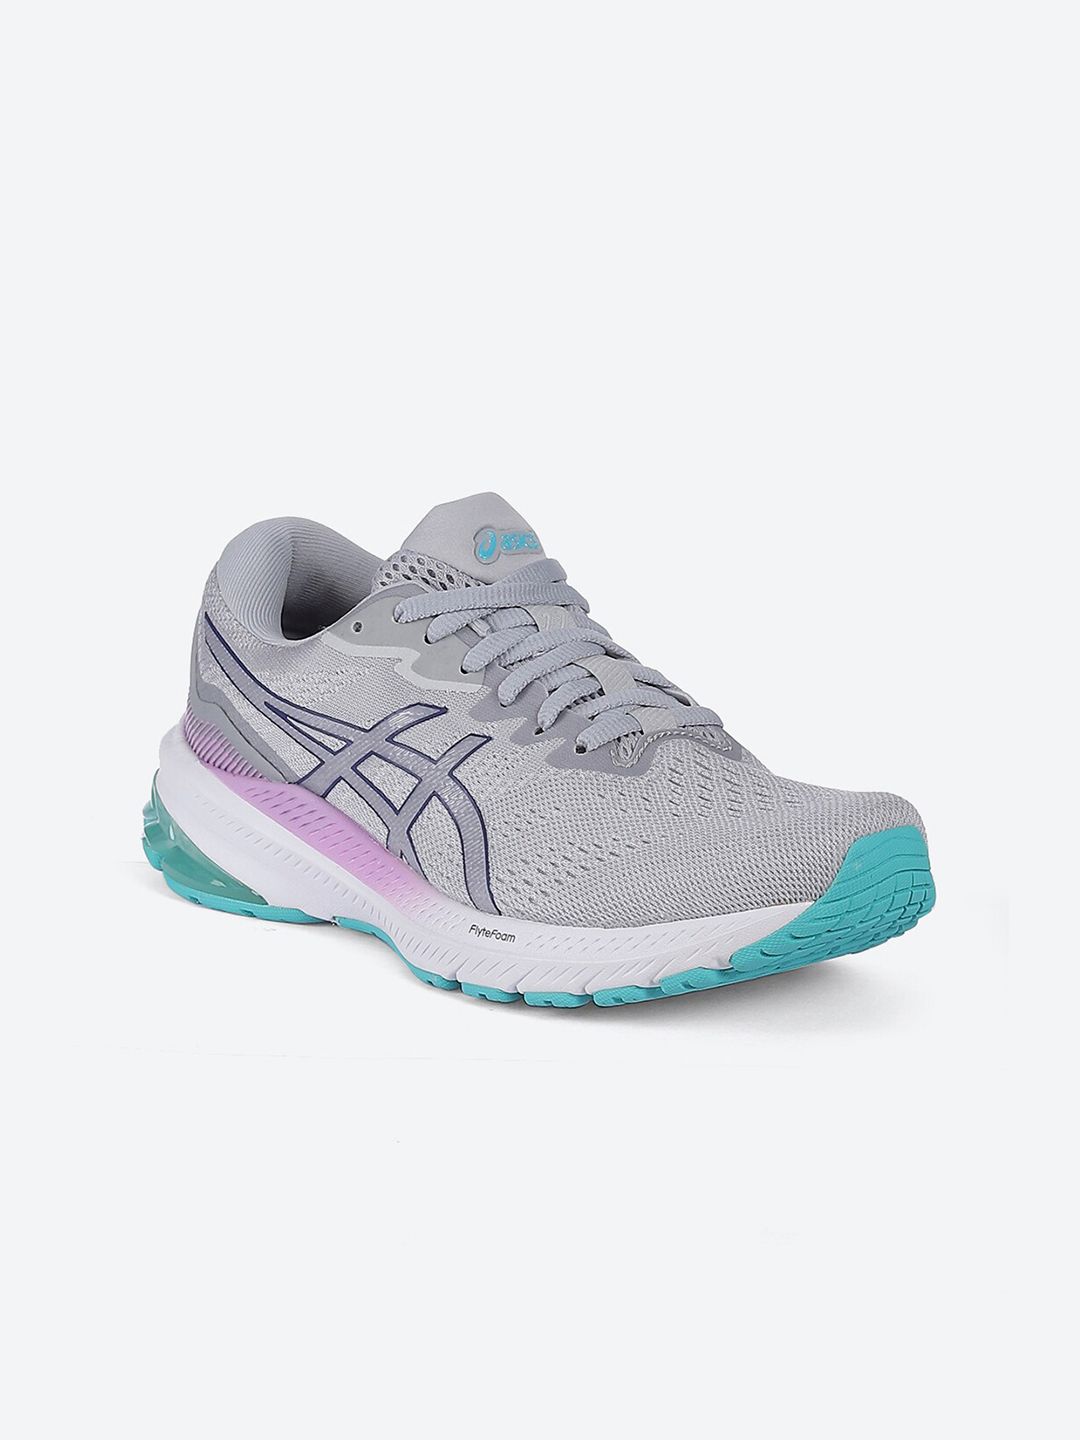 ASICS Women Grey Sports Shoes Price in India